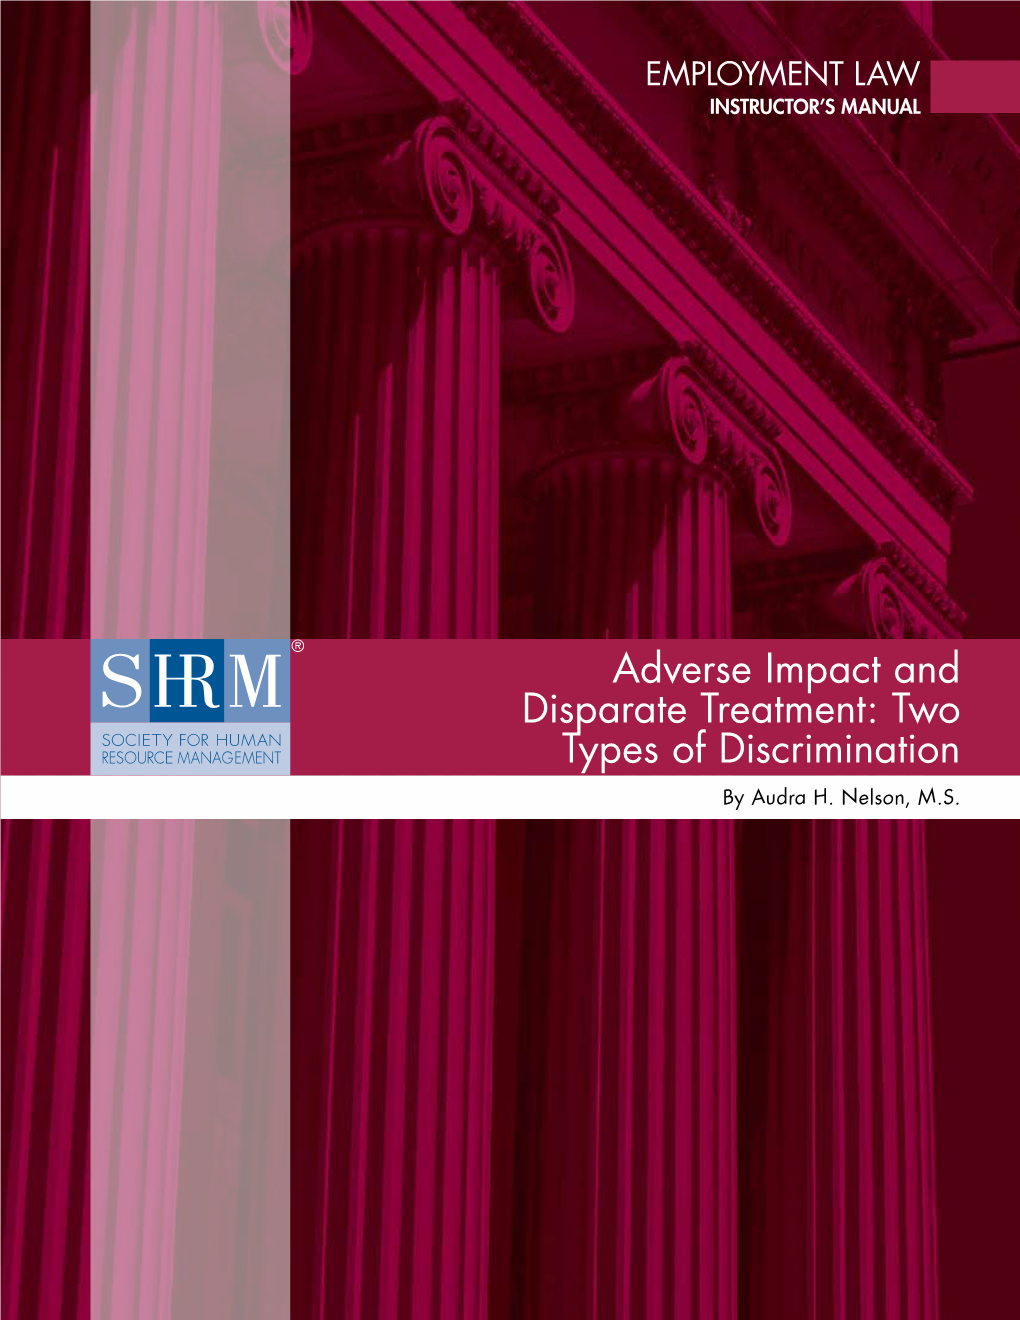 Adverse Impact and Disparate Treatment: Two Types of Discrimination by Audra H